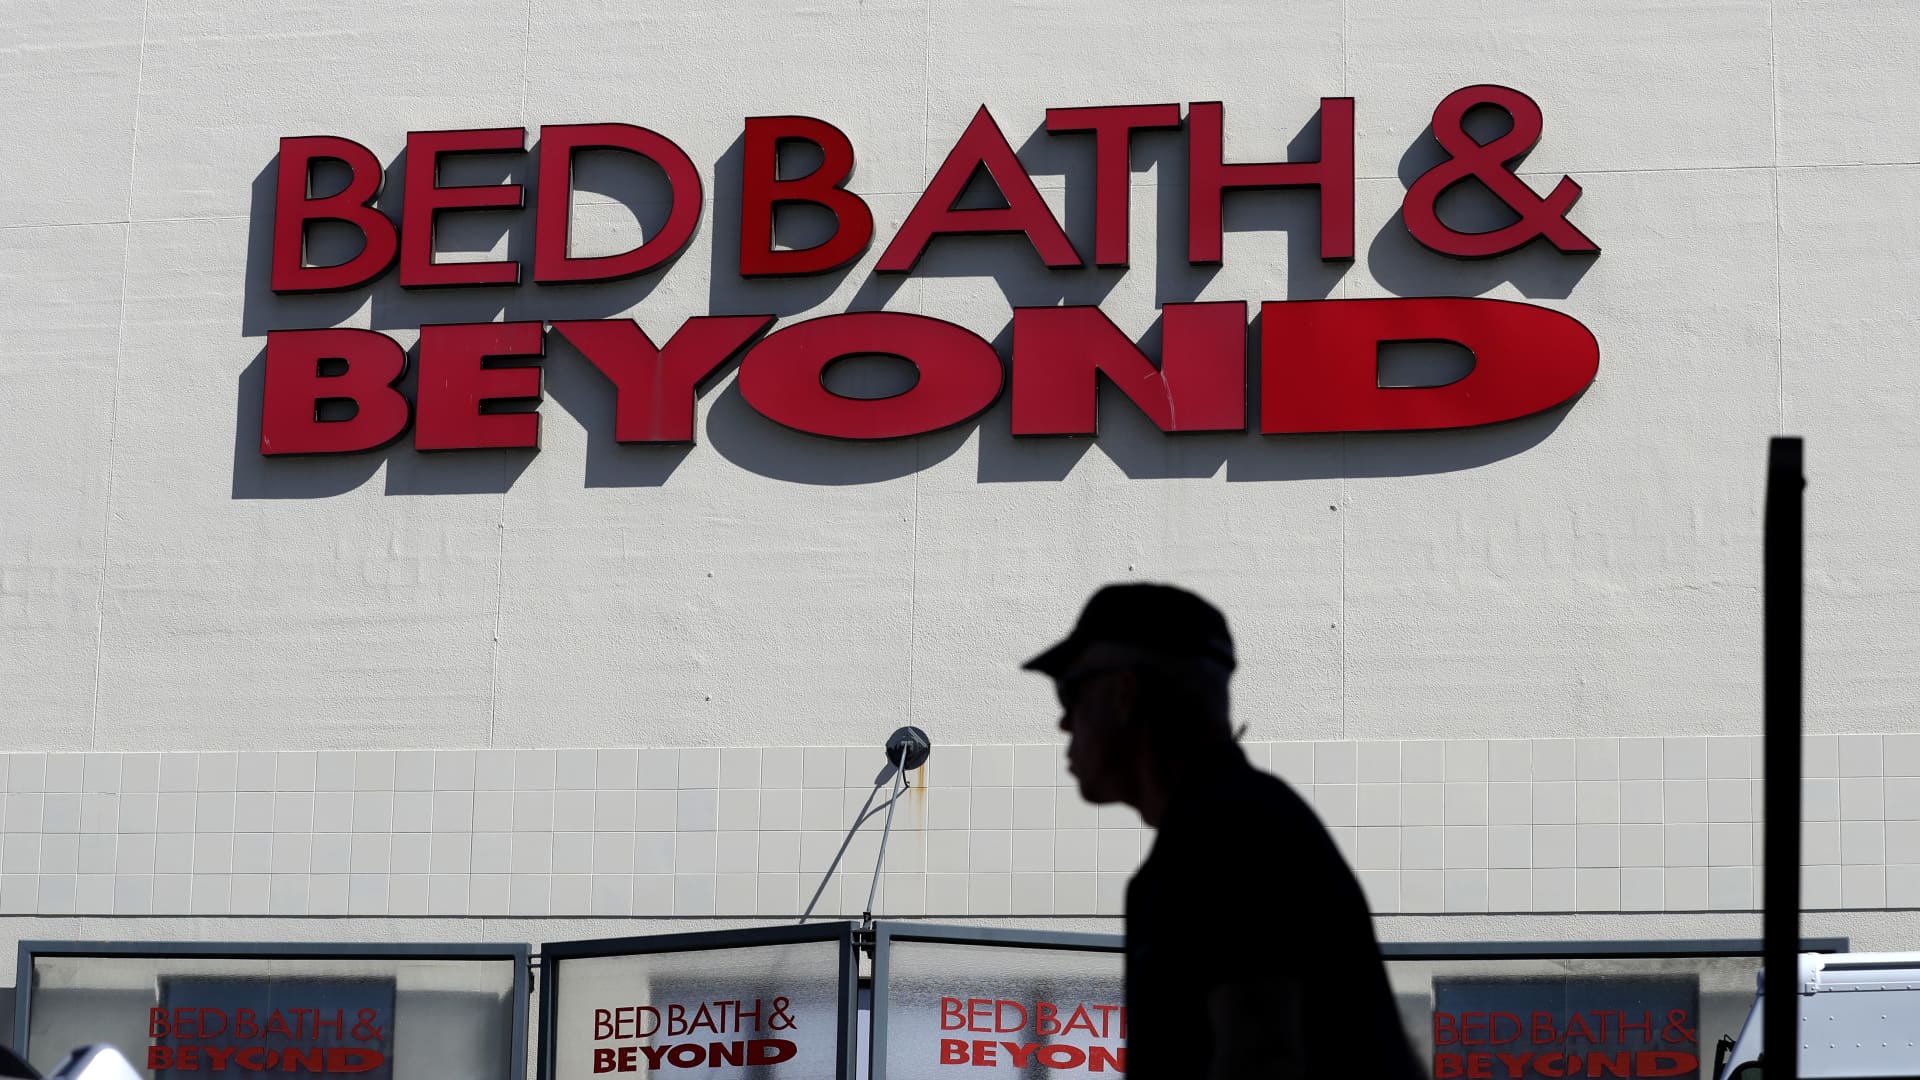 Bed Bath & Beyond (BBBY) Q1 2022 earnings